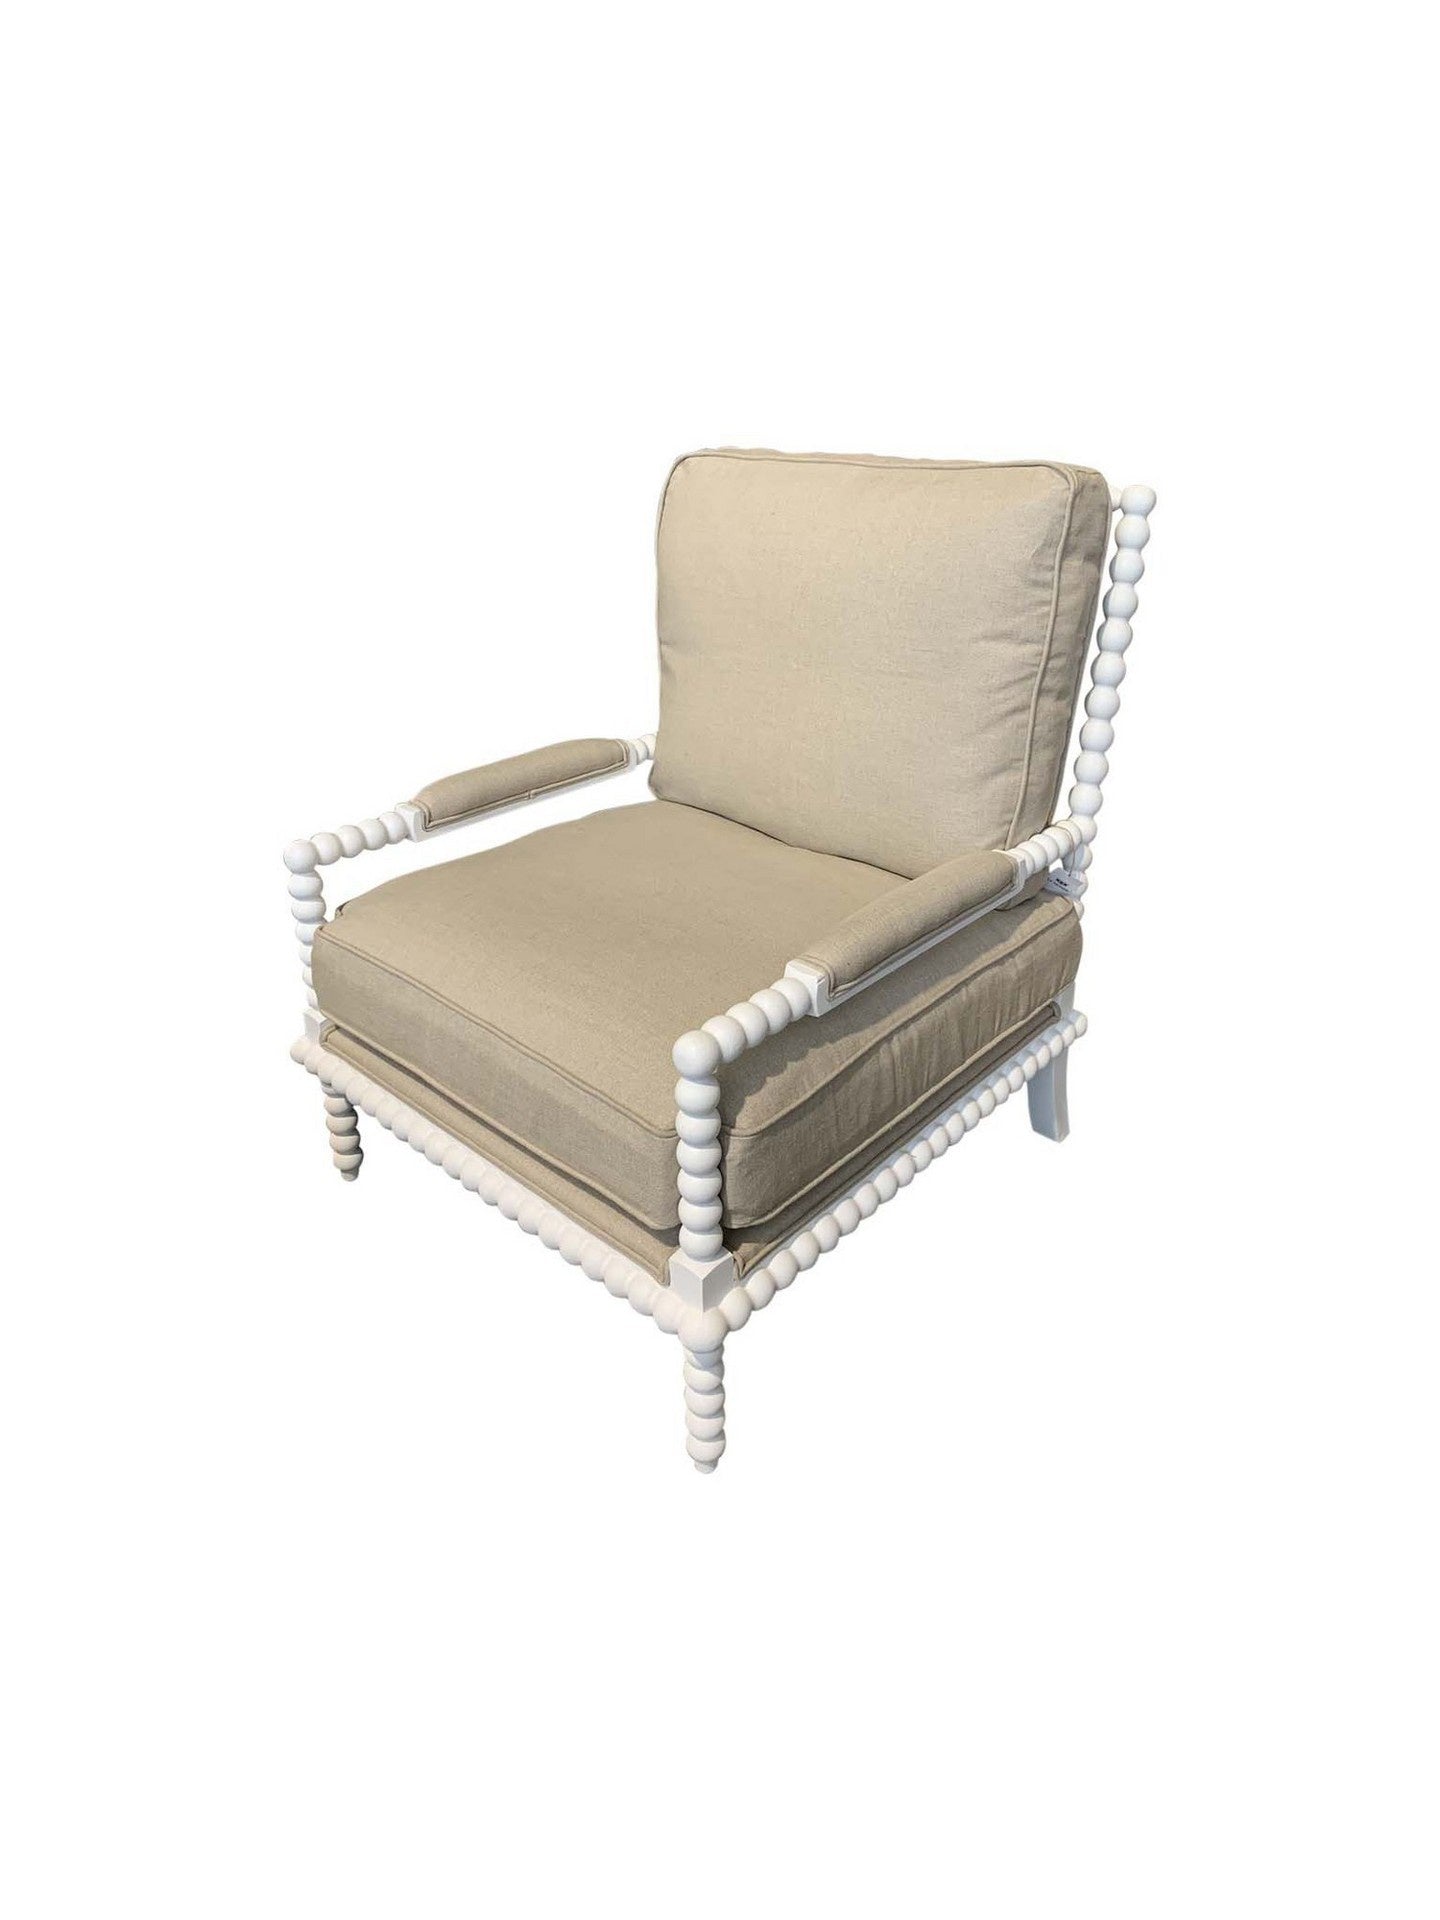 Coastal Classic Occasional Chair